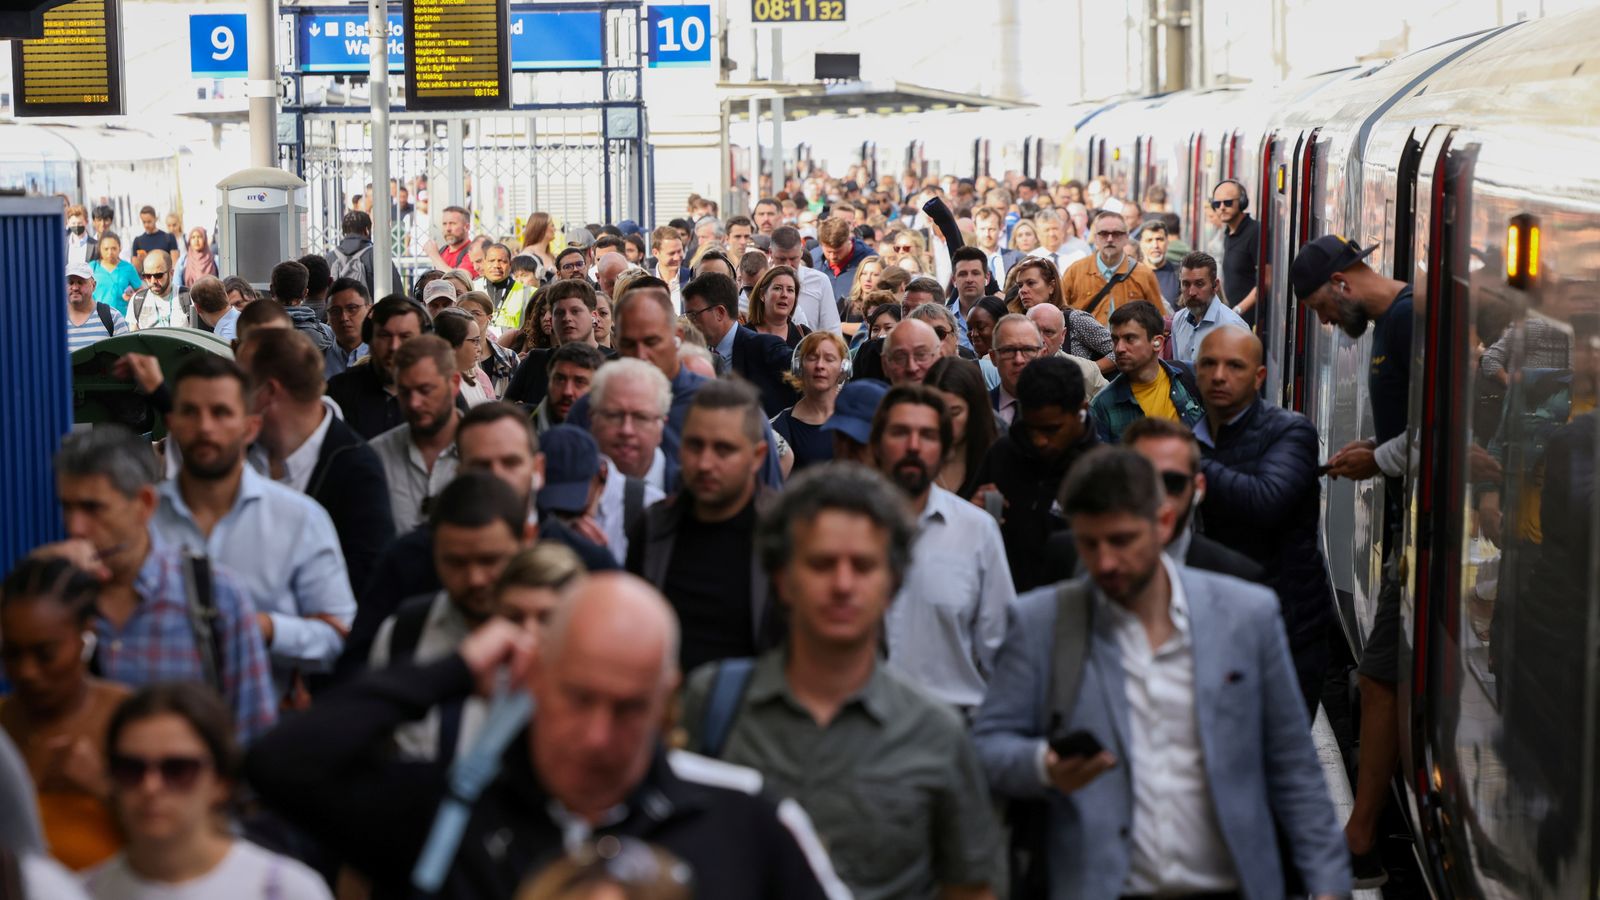 Train season ticket use collapses as more people work from home